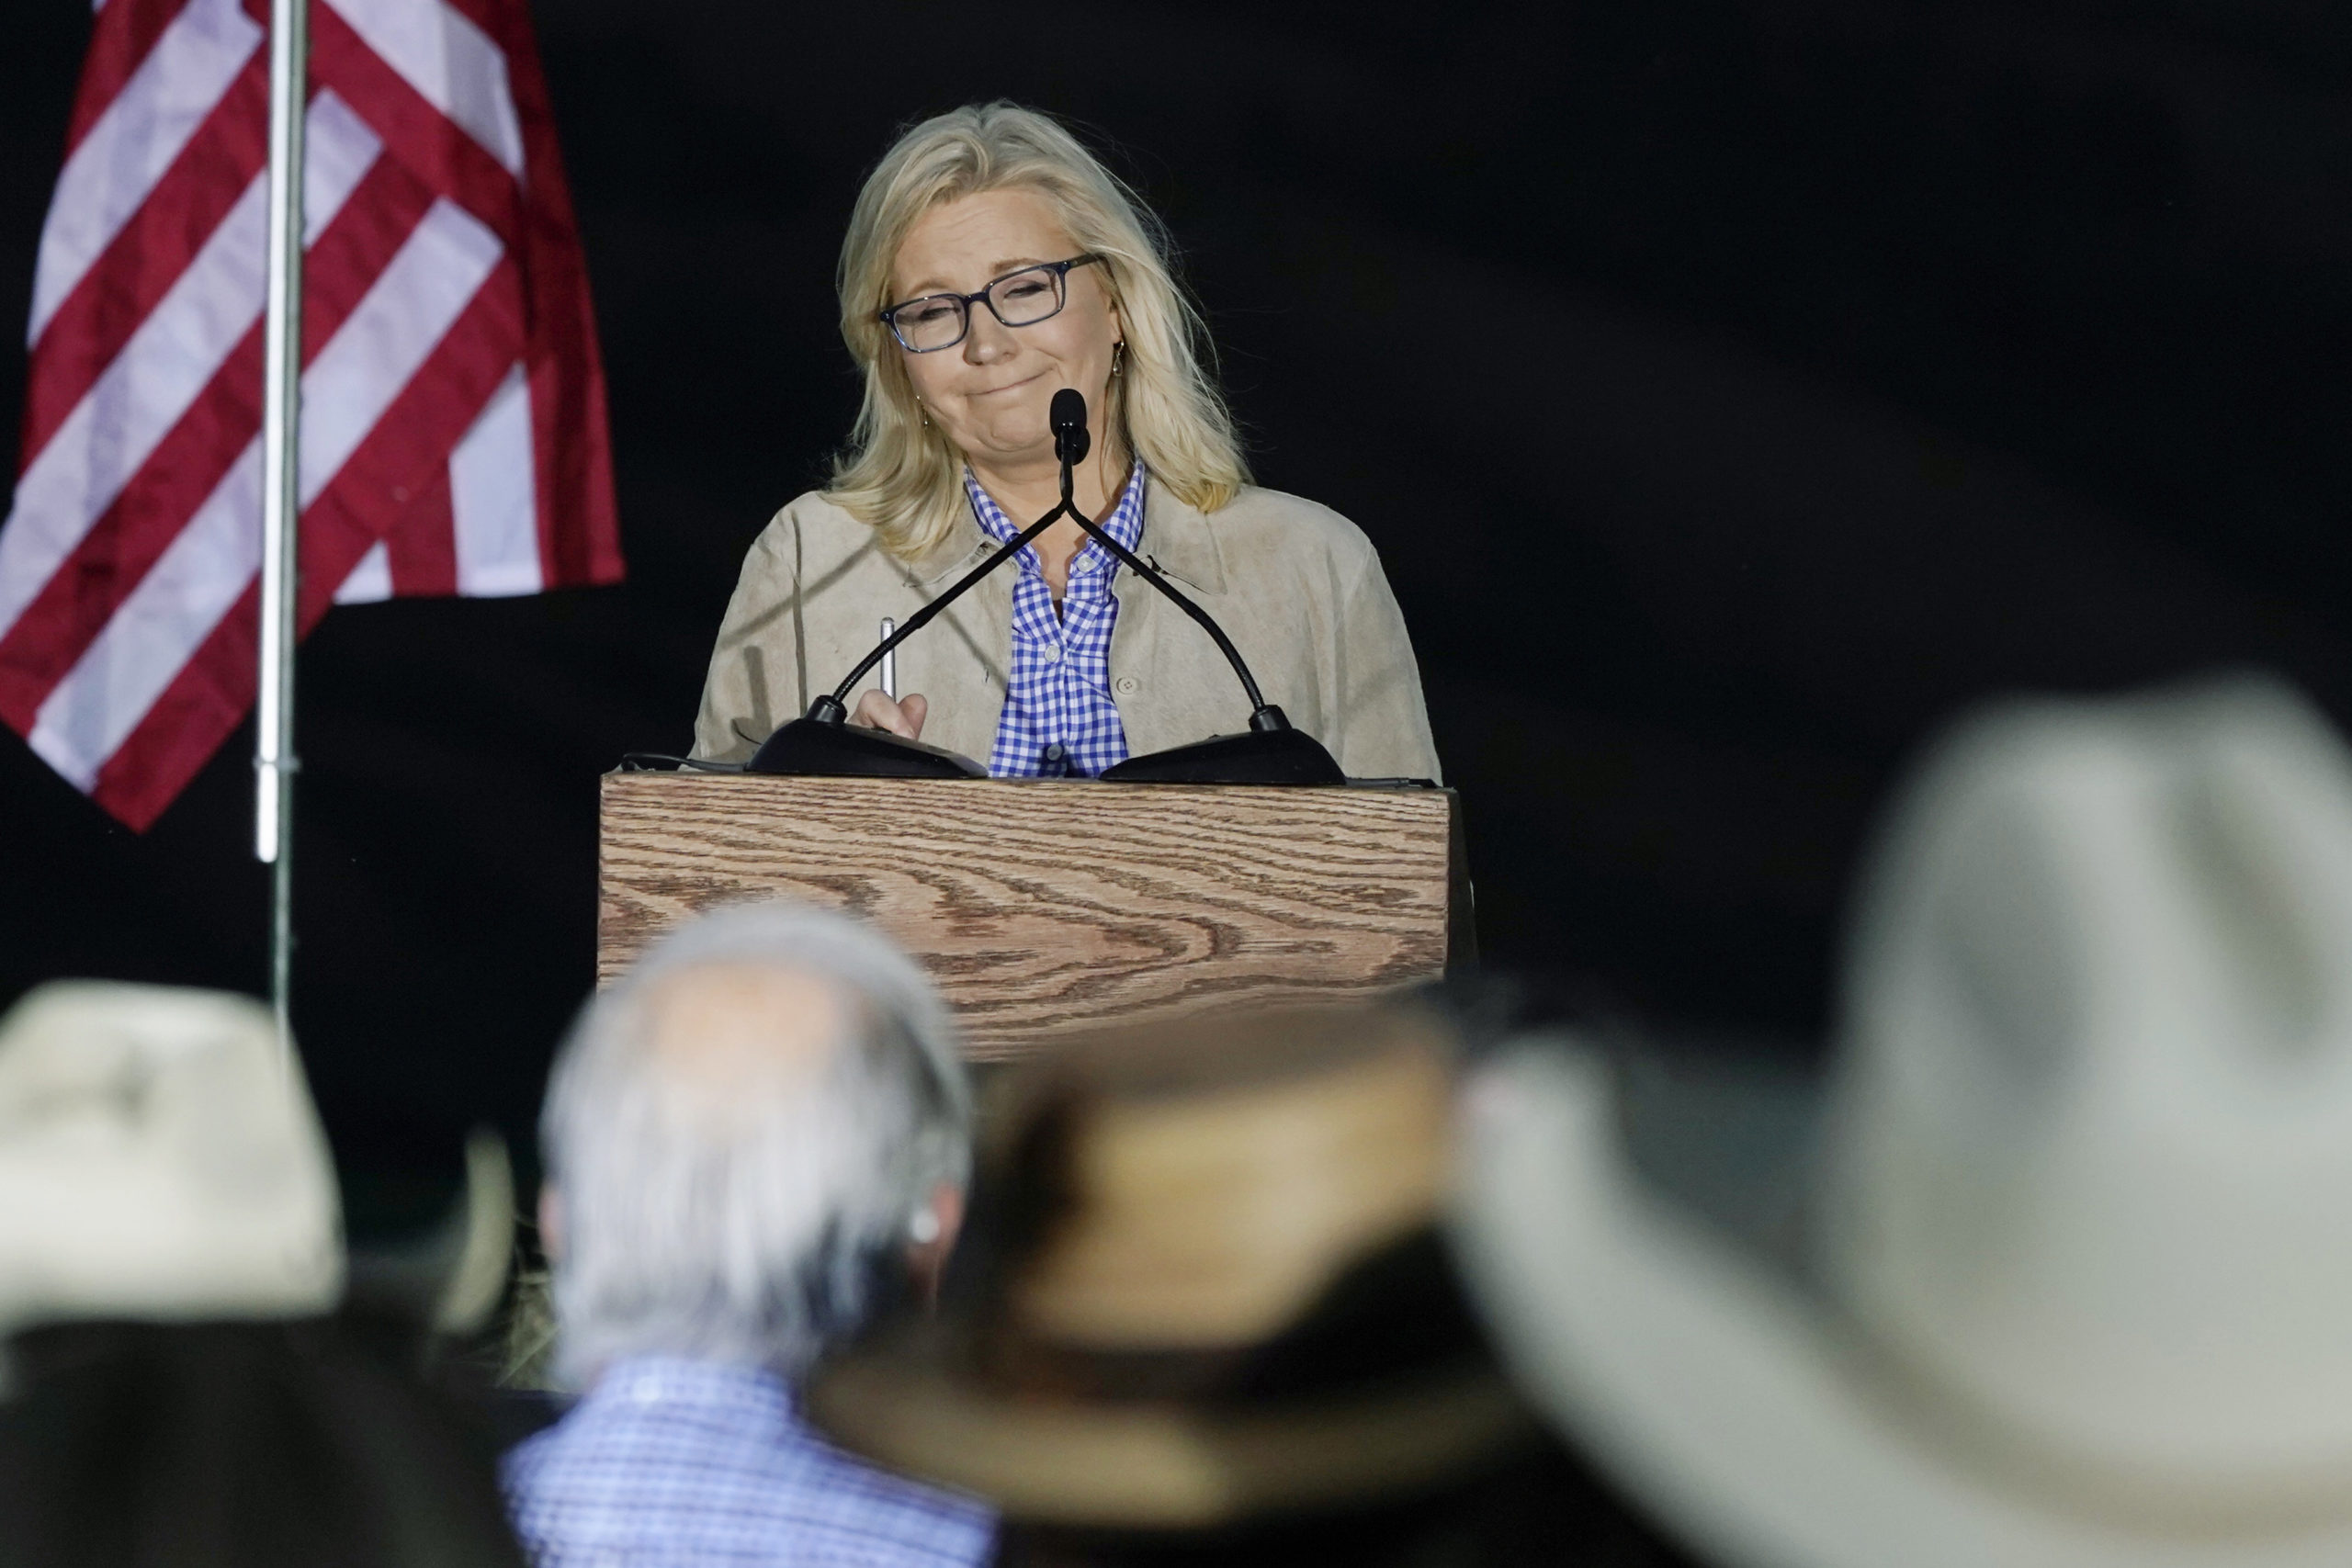 Liz Cheney loses primary but eyes political future, potential presidential run